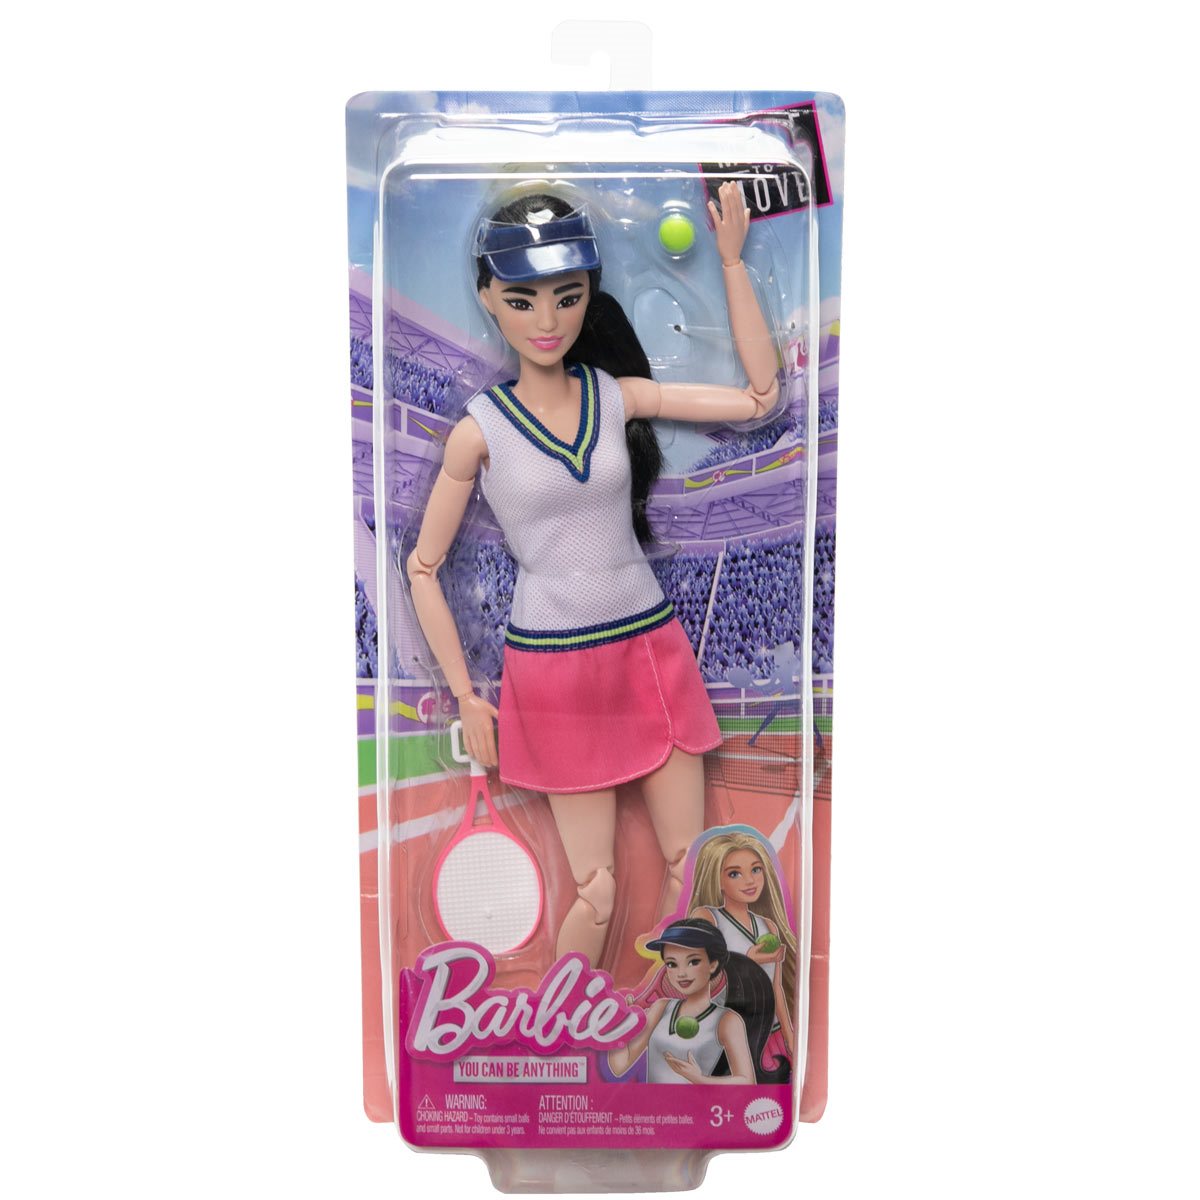 Frost krydstogt indeks Barbie Made to Move Tennis Player Doll - Entertainment Earth